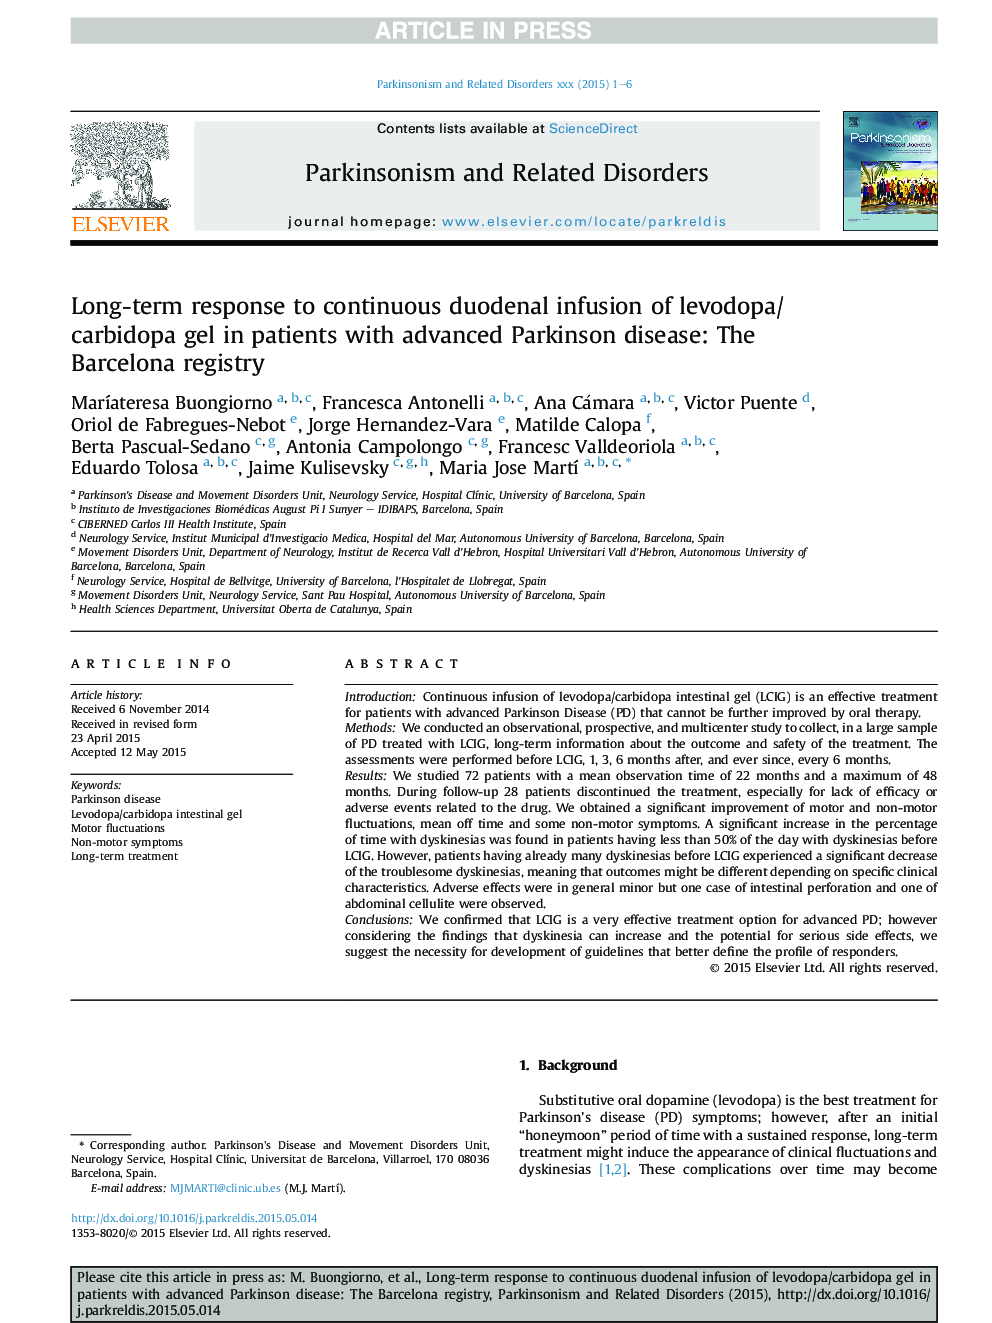 Long-term response to continuous duodenal infusion of levodopa/carbidopa gel in patients with advanced Parkinson disease: The Barcelona registry